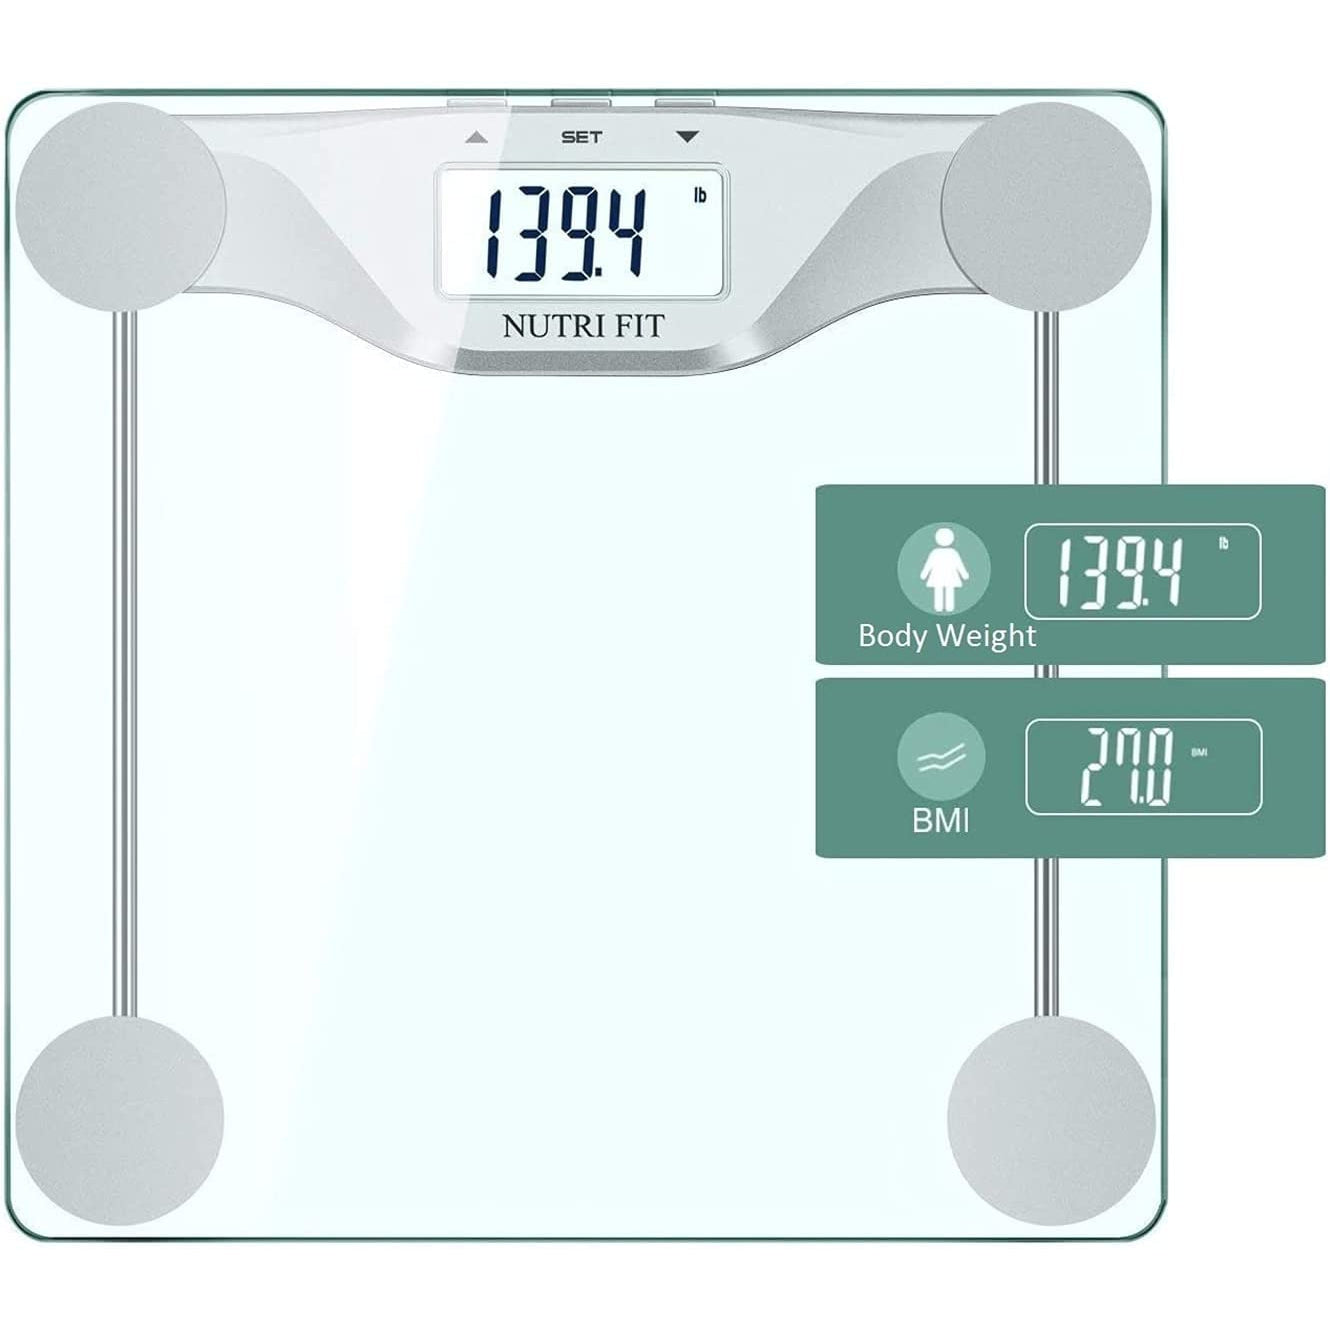 Nutri Fit High Precision Digital Body Weight Scales Ultra-Thin 5MM Tempered Glass, Step-on Technology and Backlight Display-Black